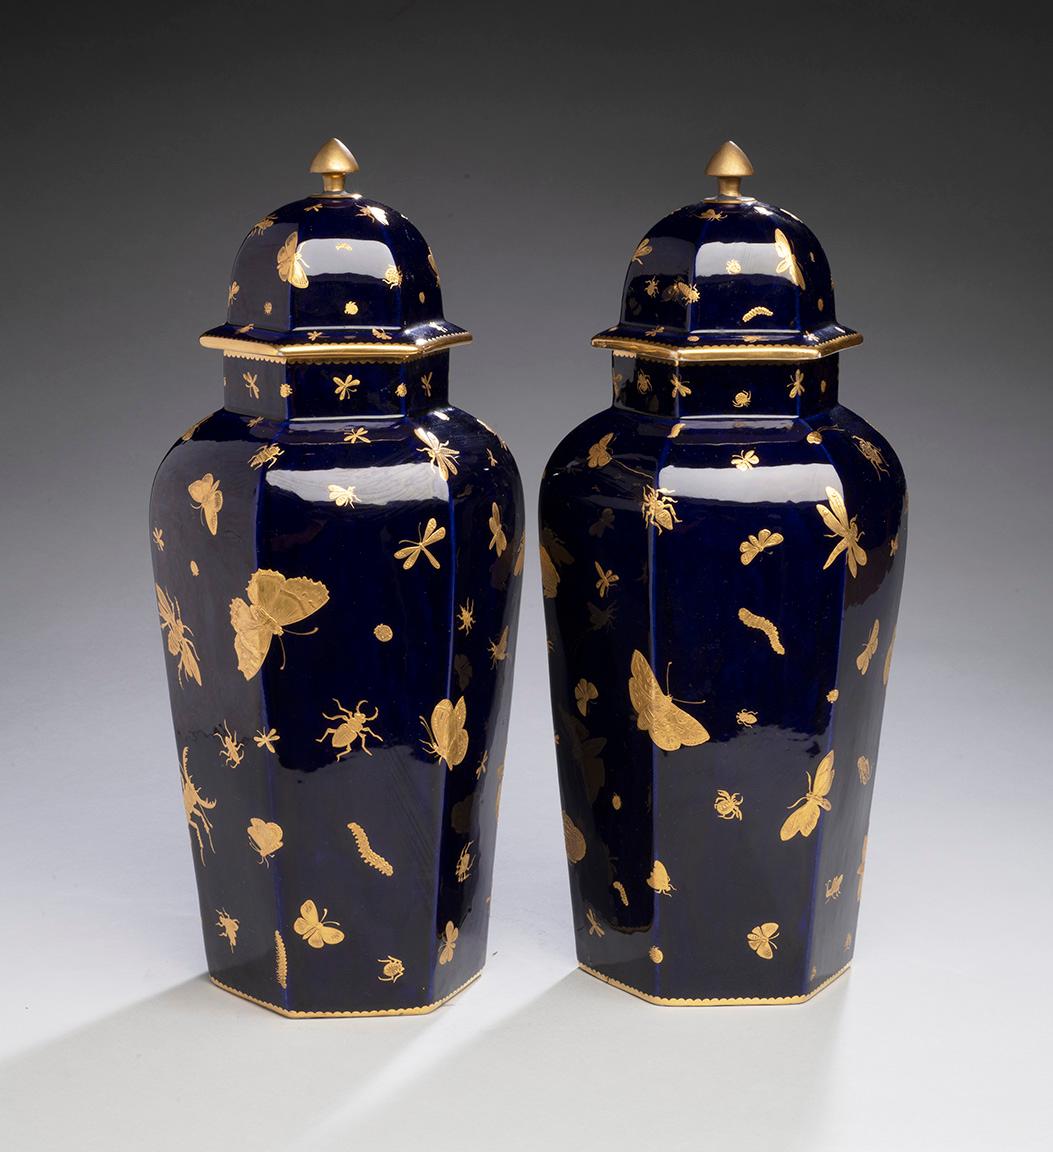 Pair of English Porcelain Vases with Insects from John Mortlock circa 1875 - Art by Unknown